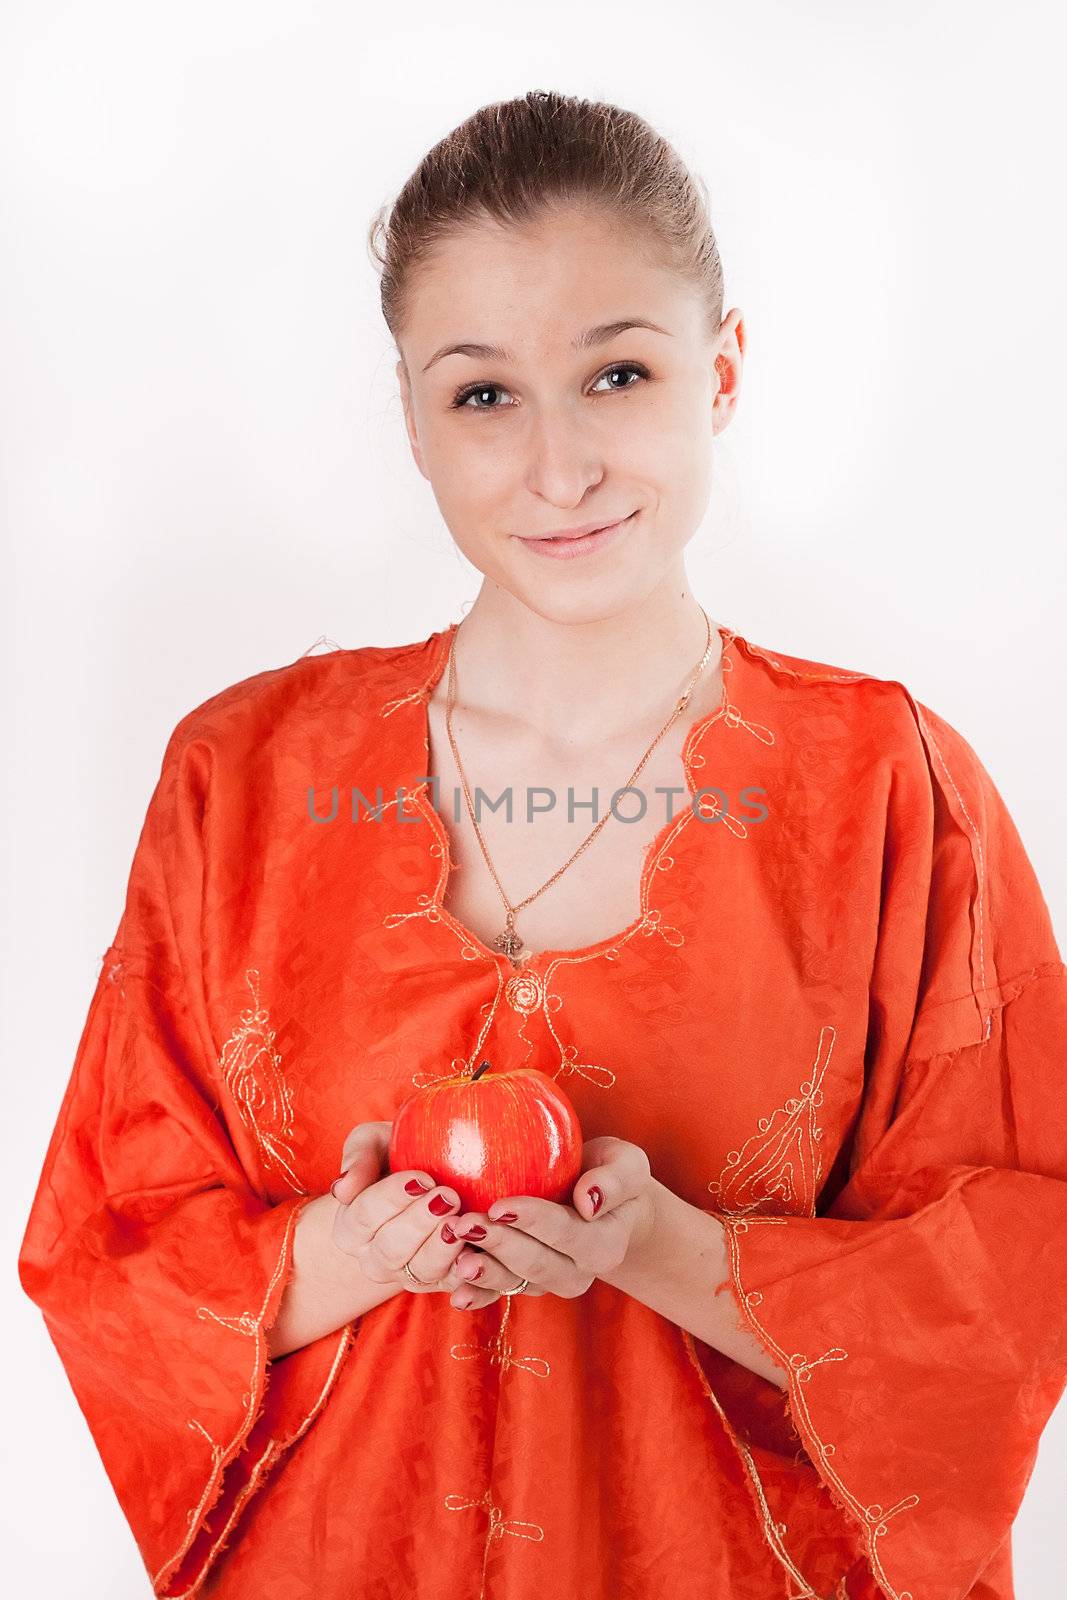 Girl in orange dress offers a red apple studio photography